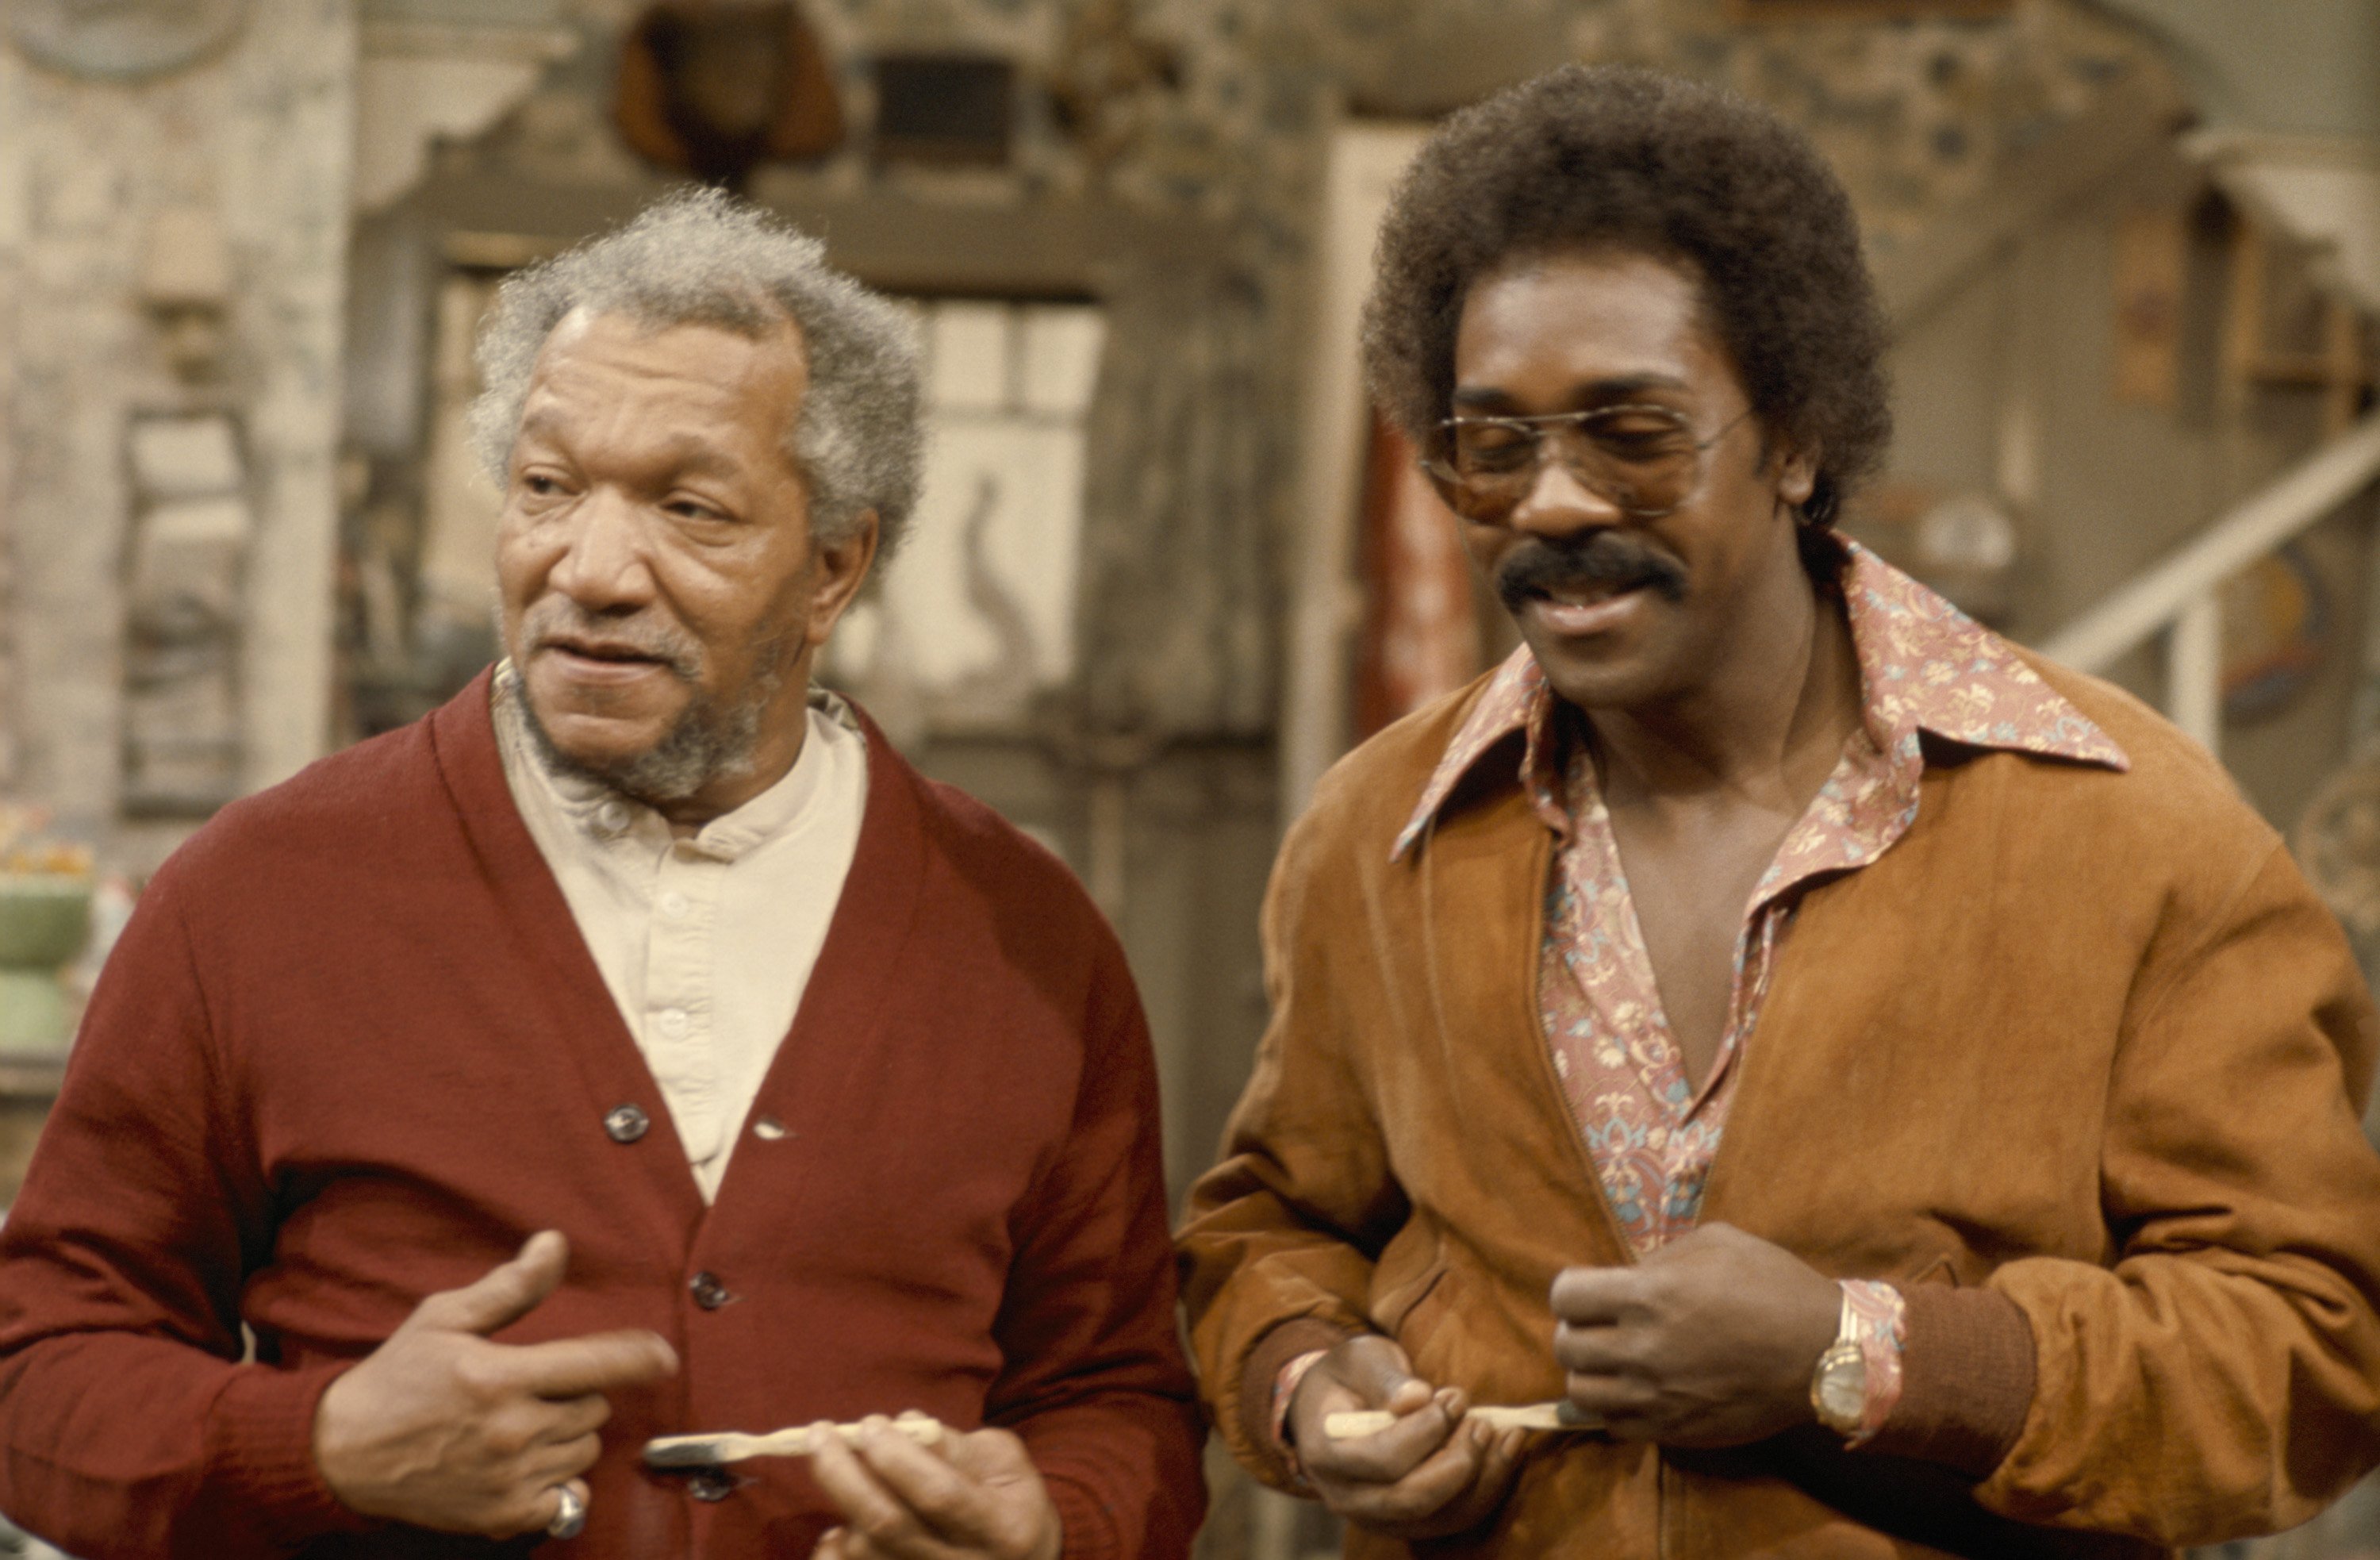 Wilson and Foxx as their characters on "Sanford and Son." | Photo: Getty Images